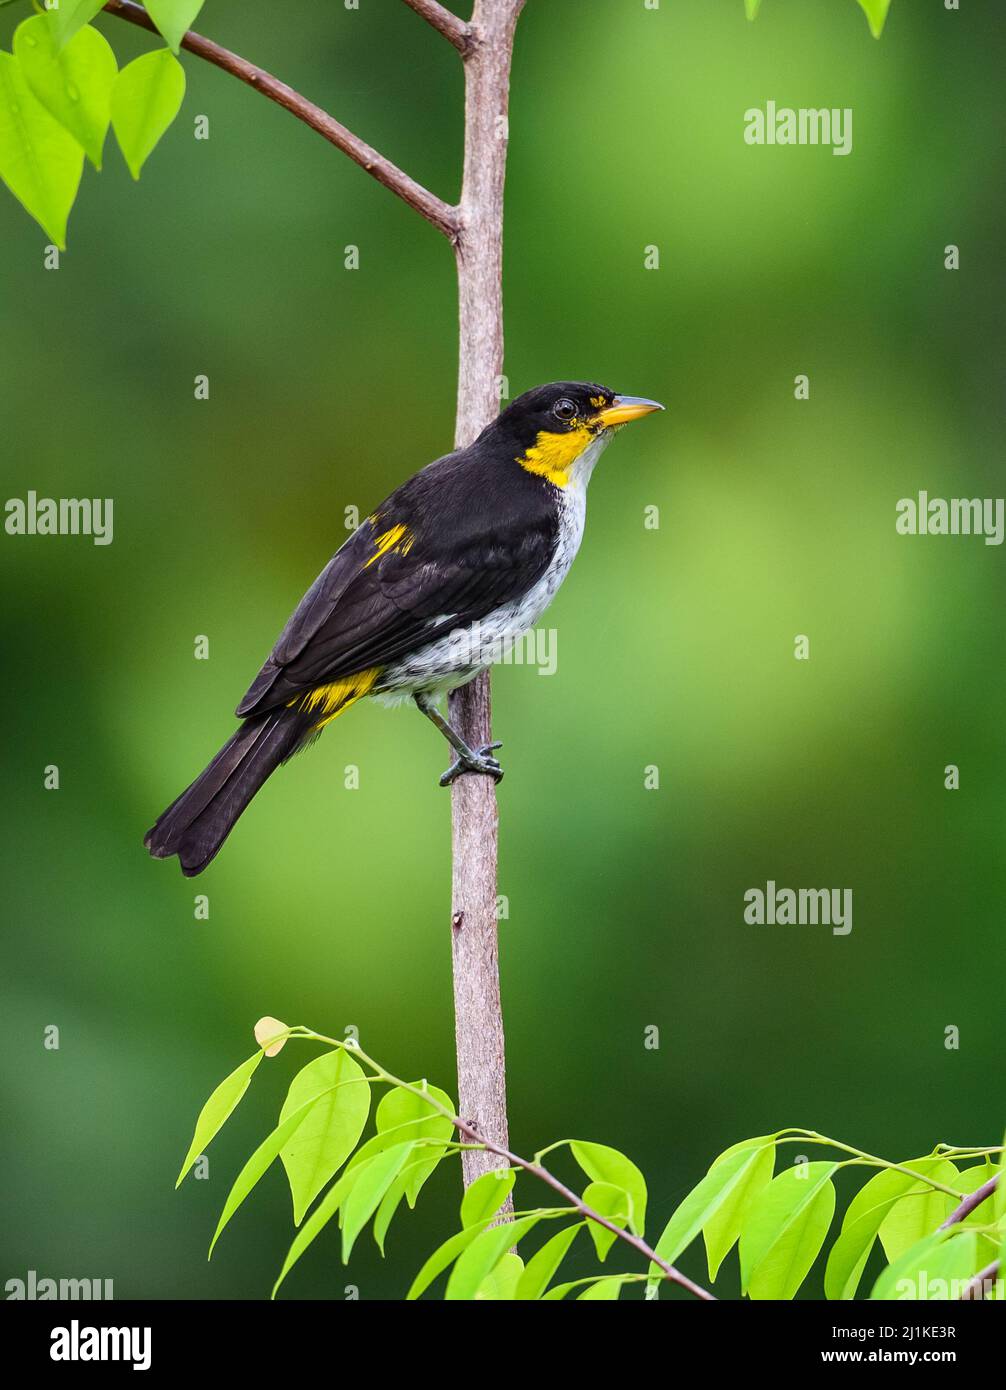 A colorful male Yellow-backed Tanager (Hemithraupis flavicollis) perched on a branch. Colombia, South America. Stock Photo